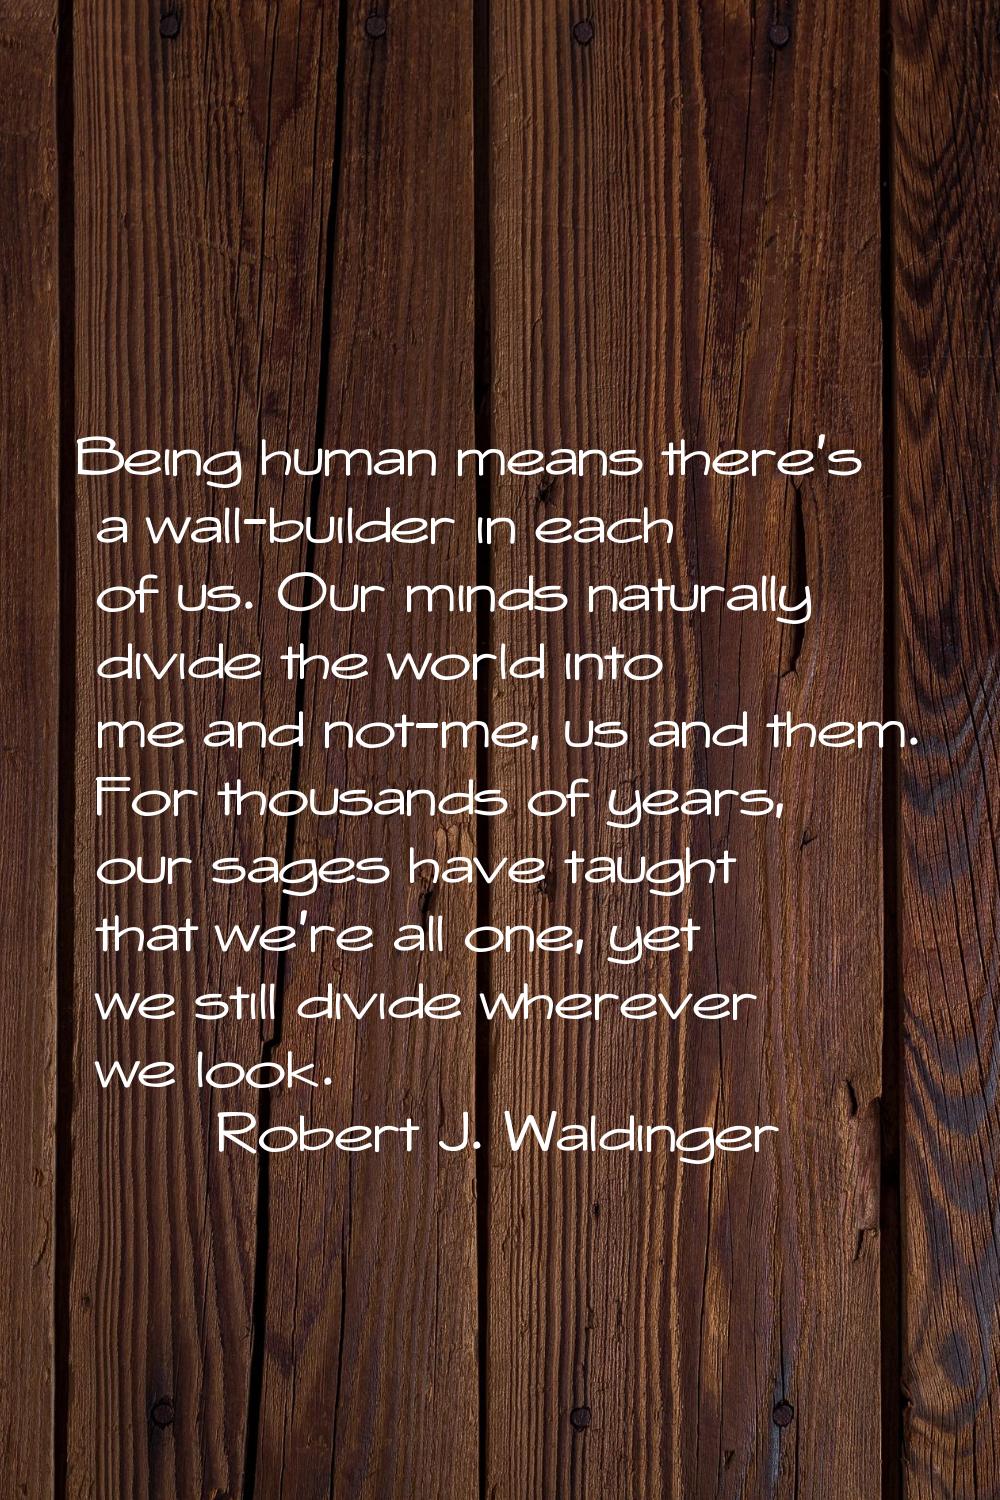 Being human means there's a wall-builder in each of us. Our minds naturally divide the world into m